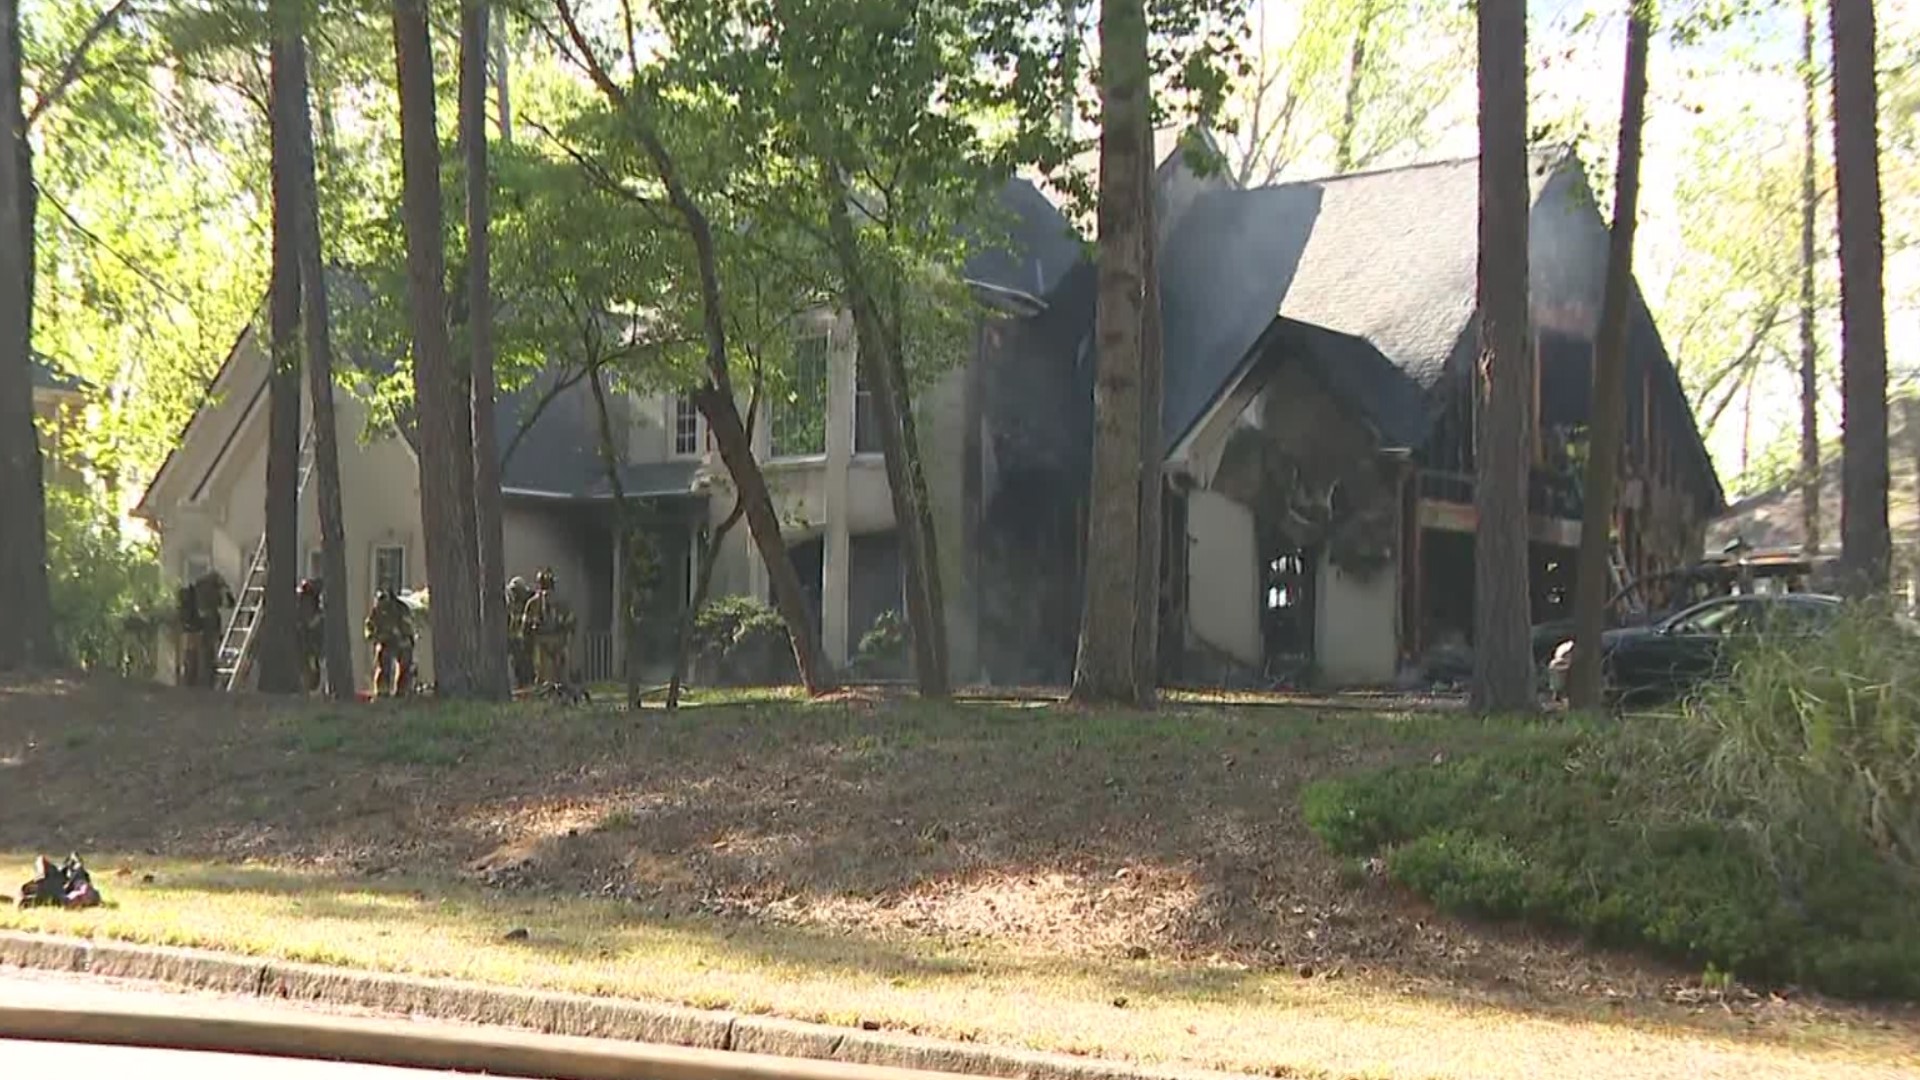 11Alive crews at the scene saw the aftermath of the fire, where the garage appeared to be scorched by the flames.